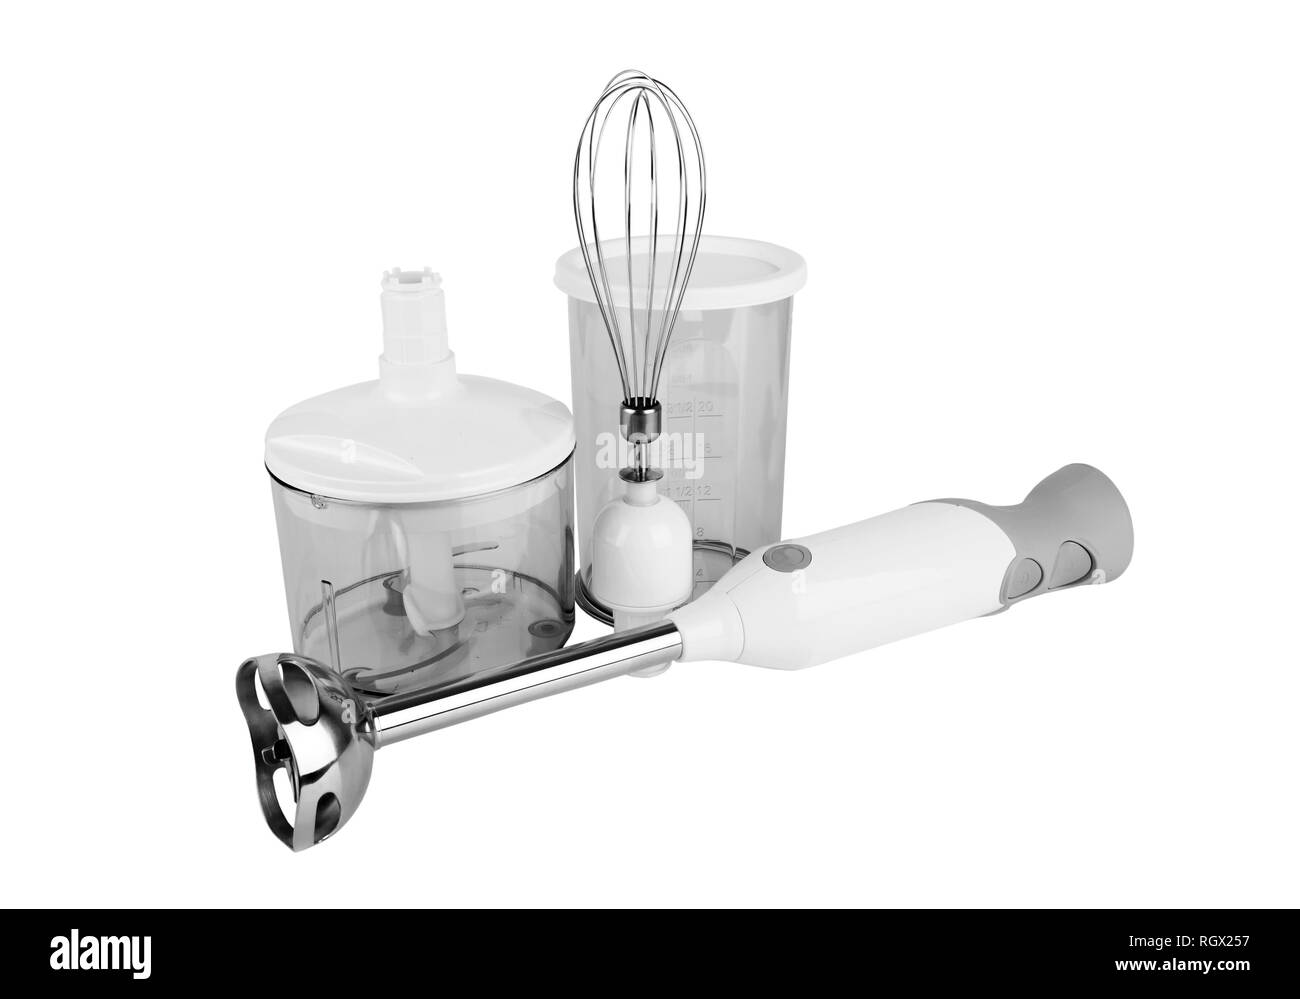 Electrical hand mixer and dishware isolated on a white Stock Photo